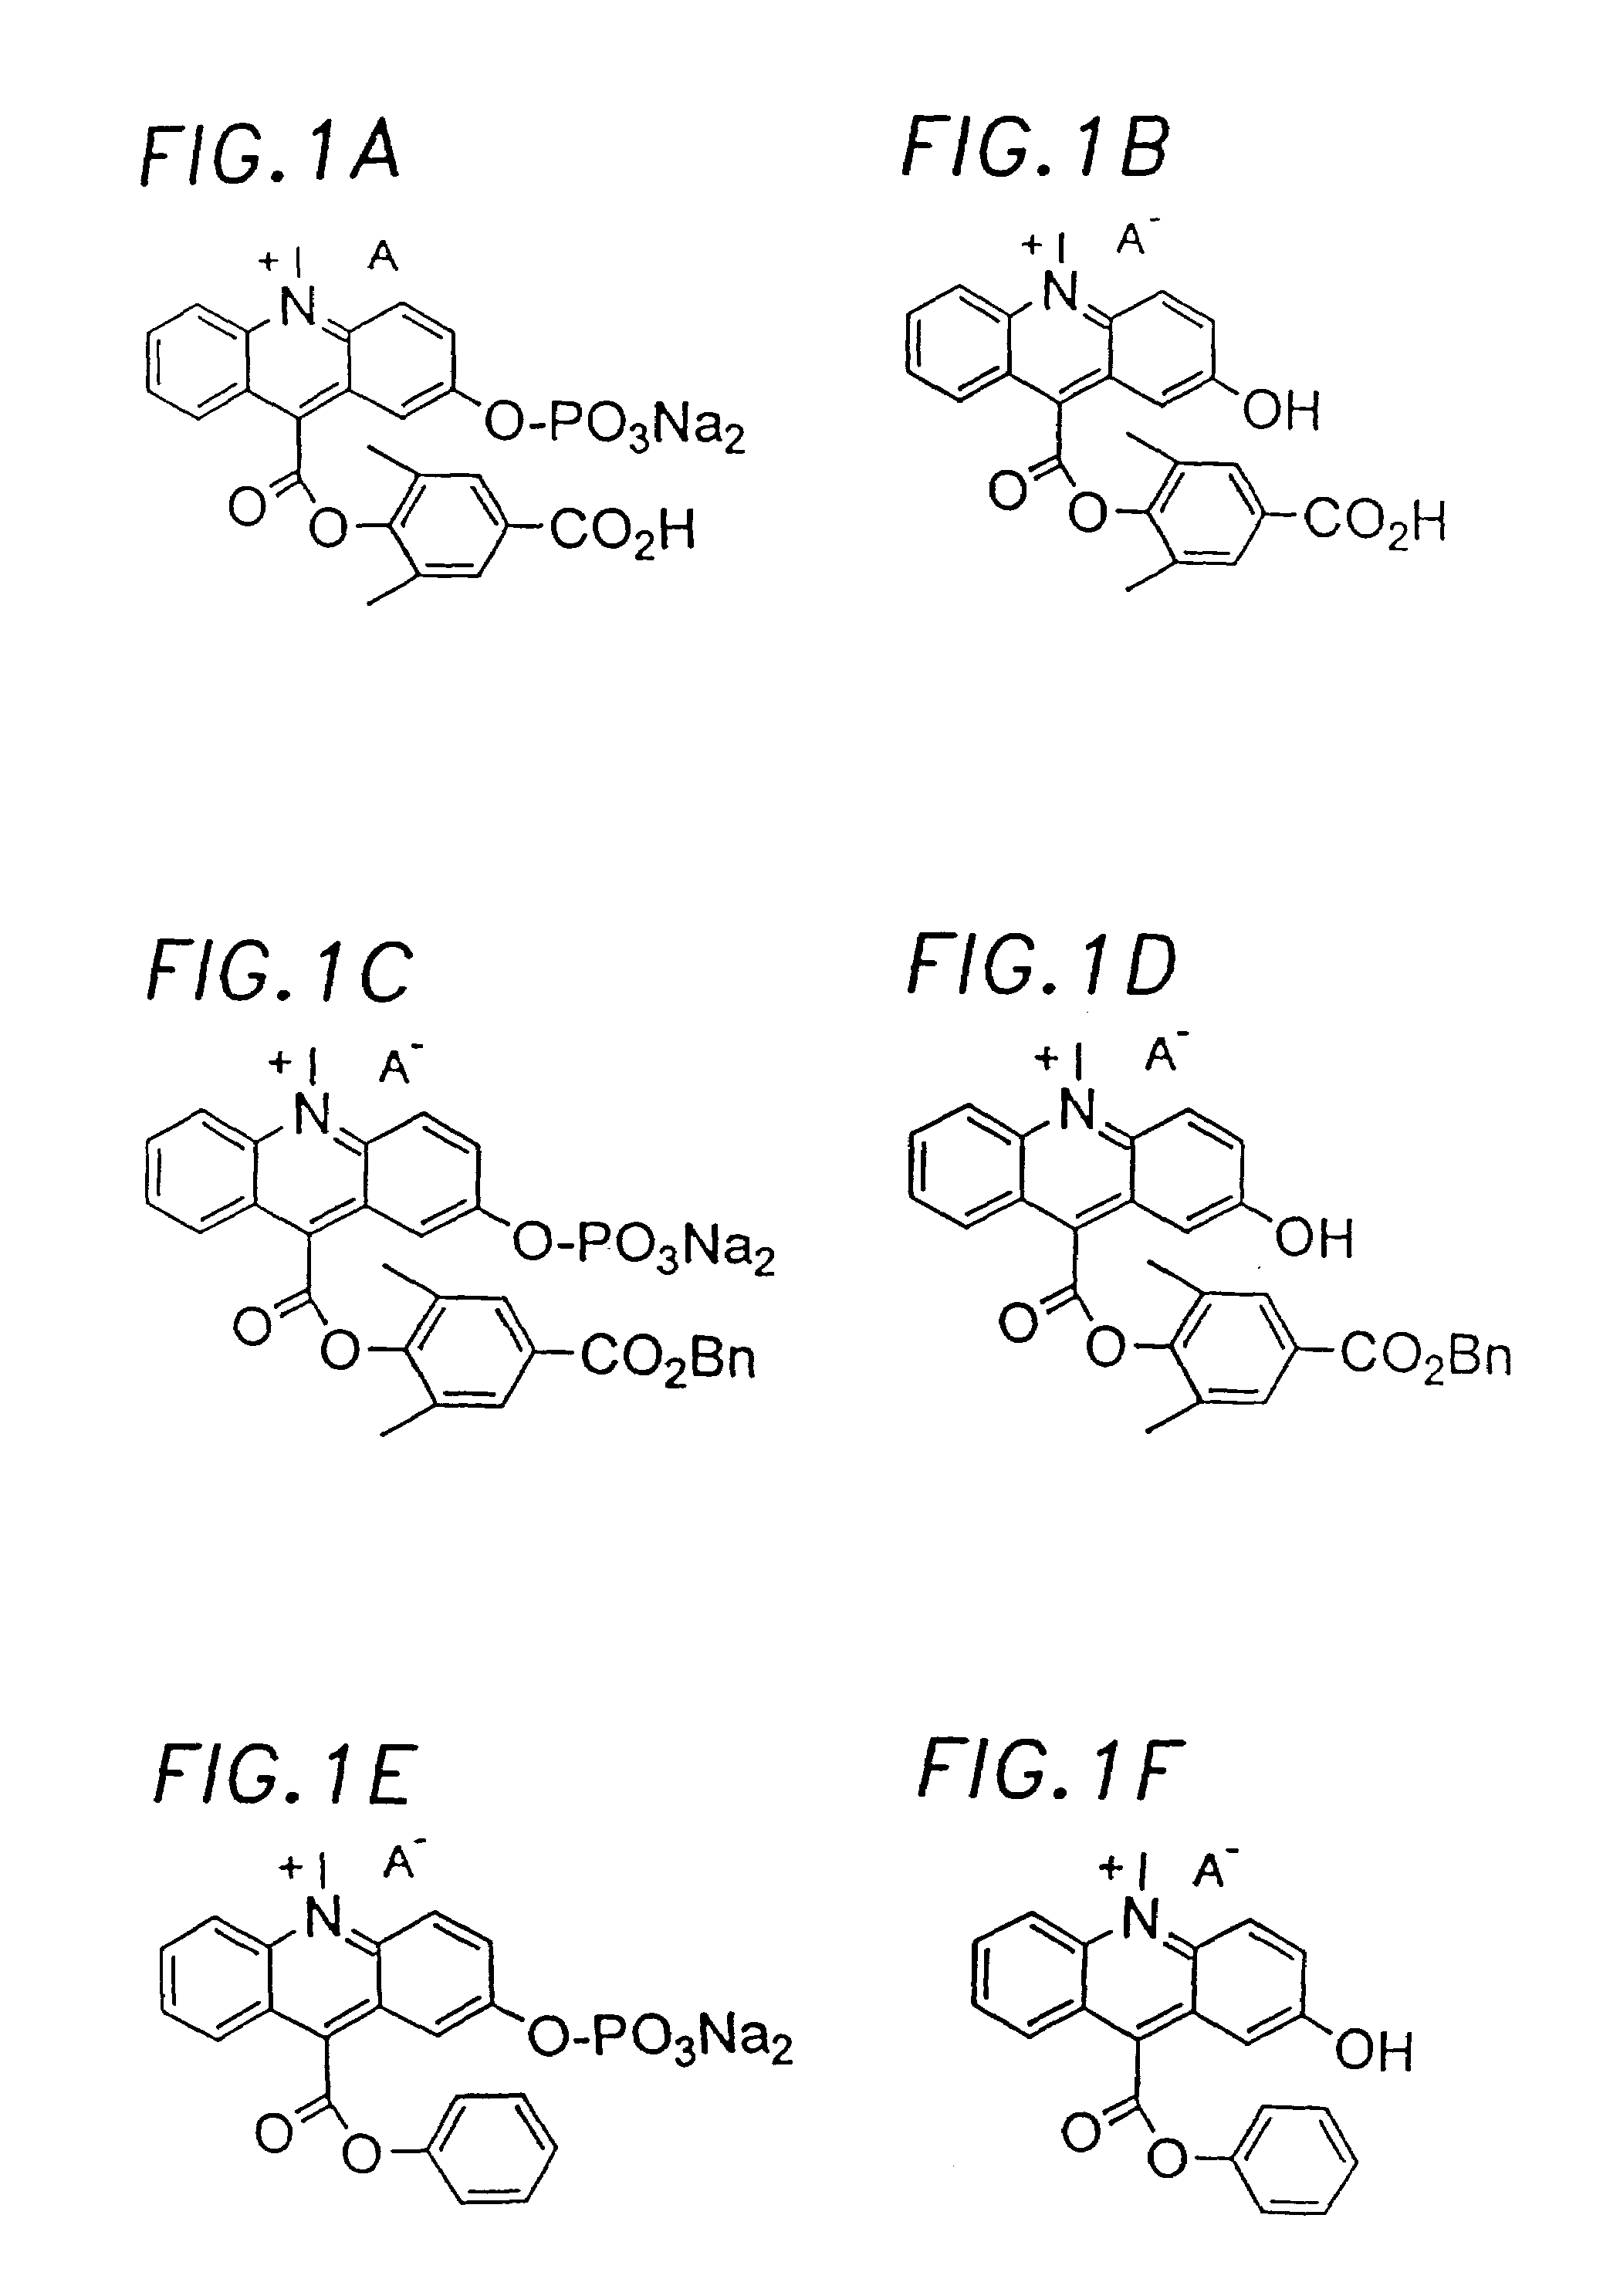 Chemiluminescent acridinium compounds and analogues thereof as substrates of hydrolytic enzymes